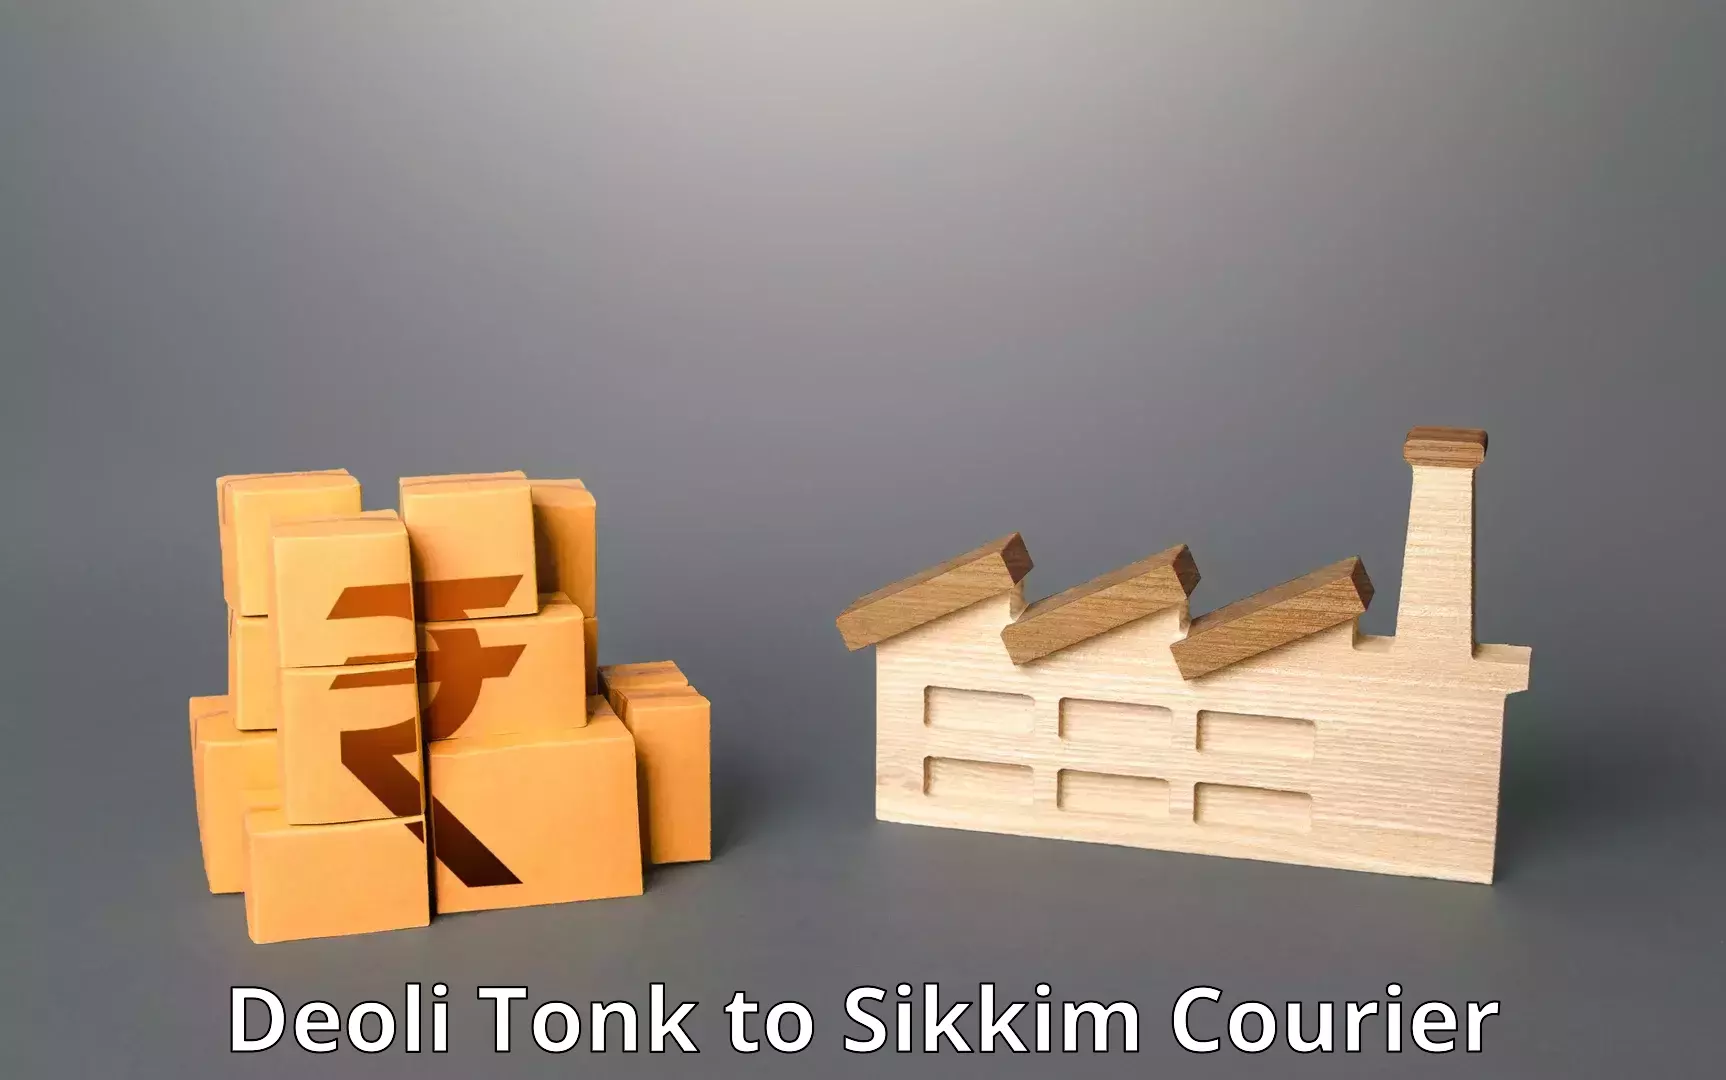 Global shipping networks Deoli Tonk to South Sikkim